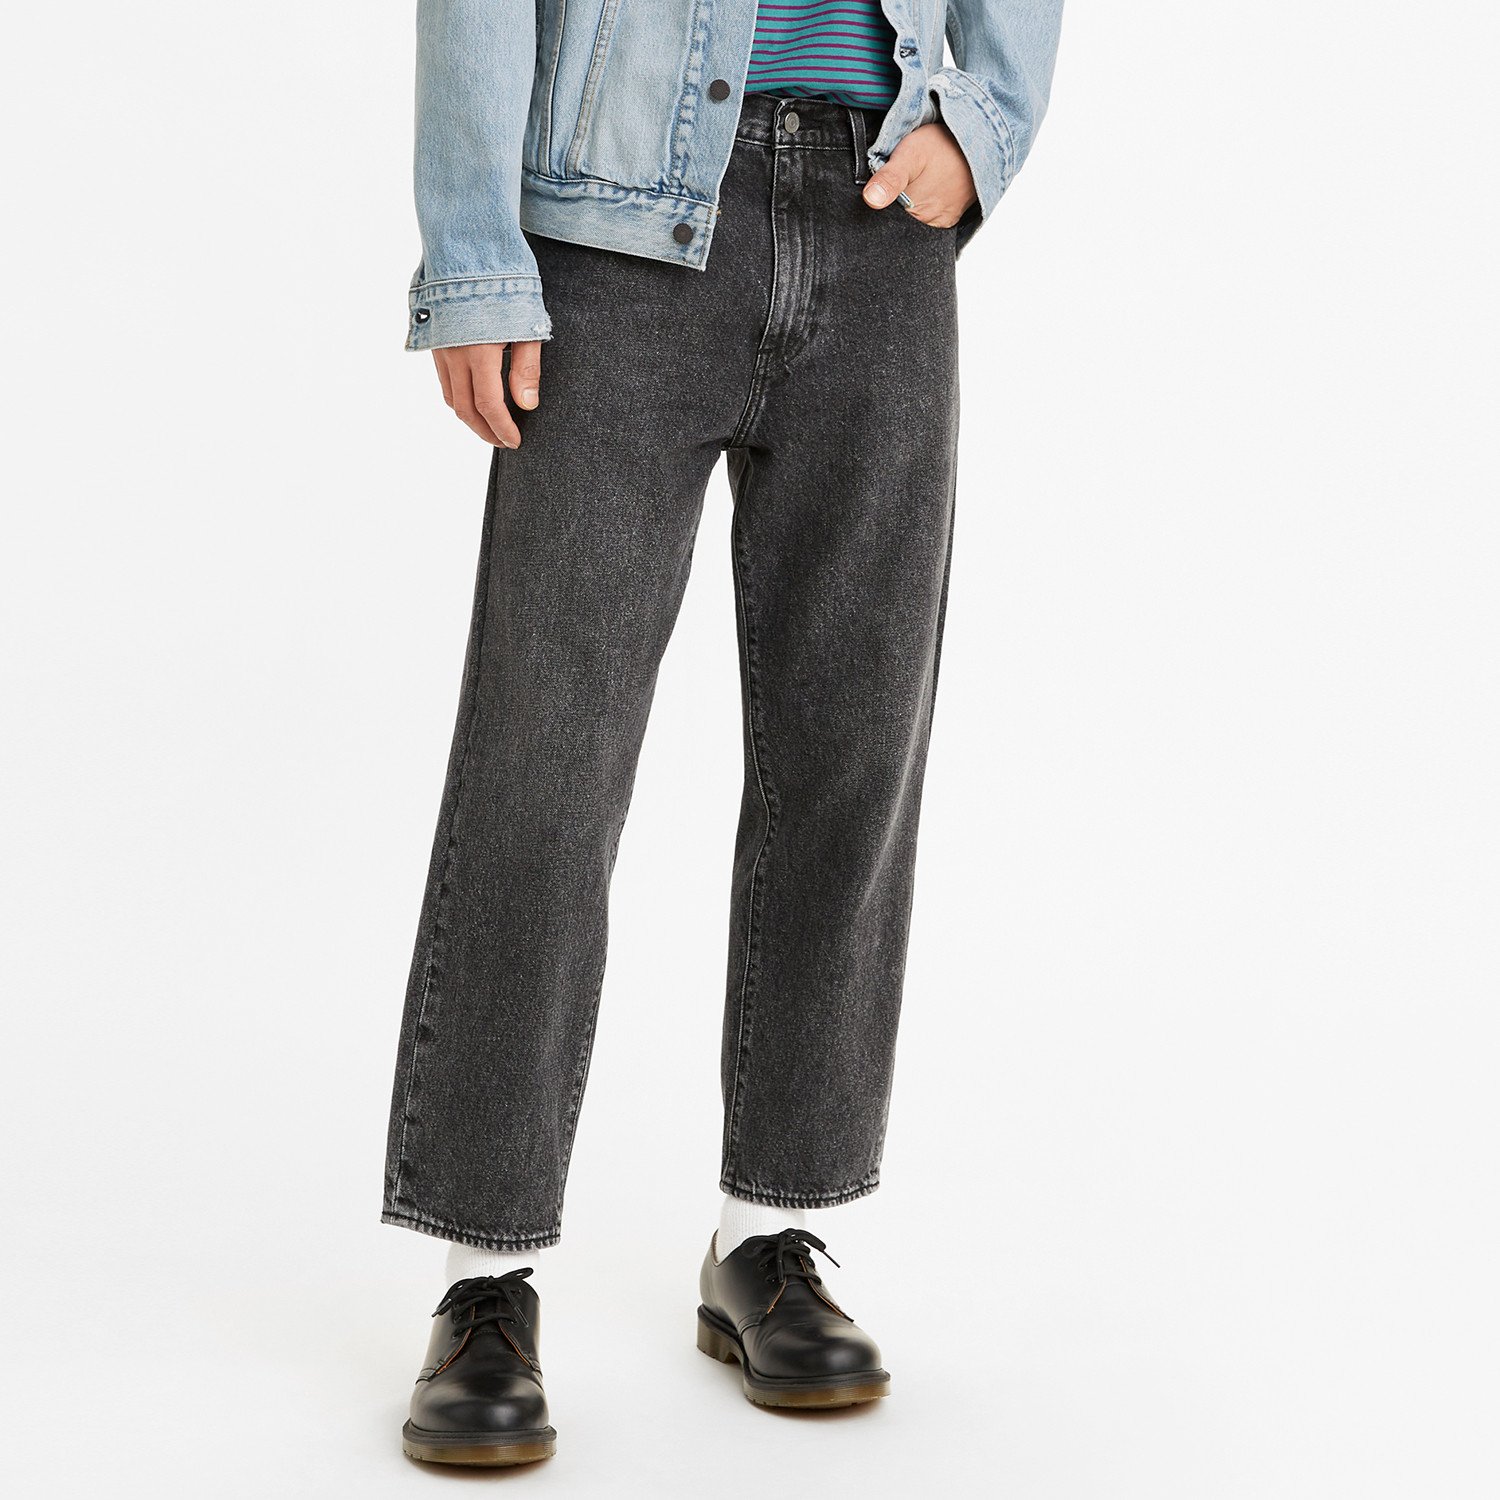 Levis Stay Loose Tapered Crop Ανδρικό Τζιν Παντελόνι (9000087135_26097)